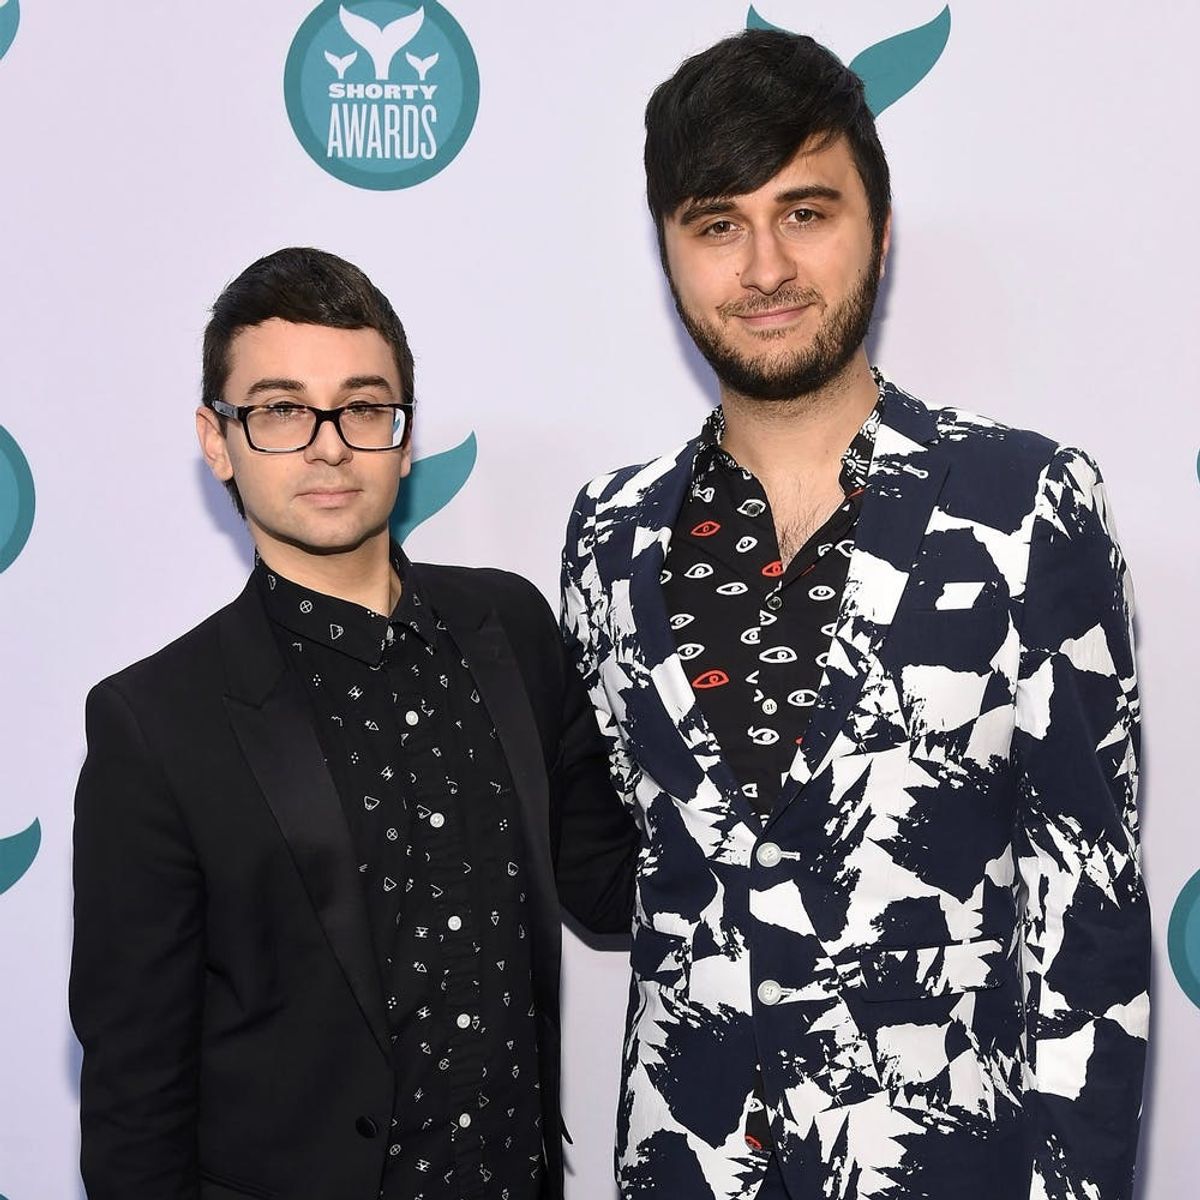 Here’s Your Behind the Scenes Look at Christian Siriano and Brad Walsh’s Star-Studded Wedding